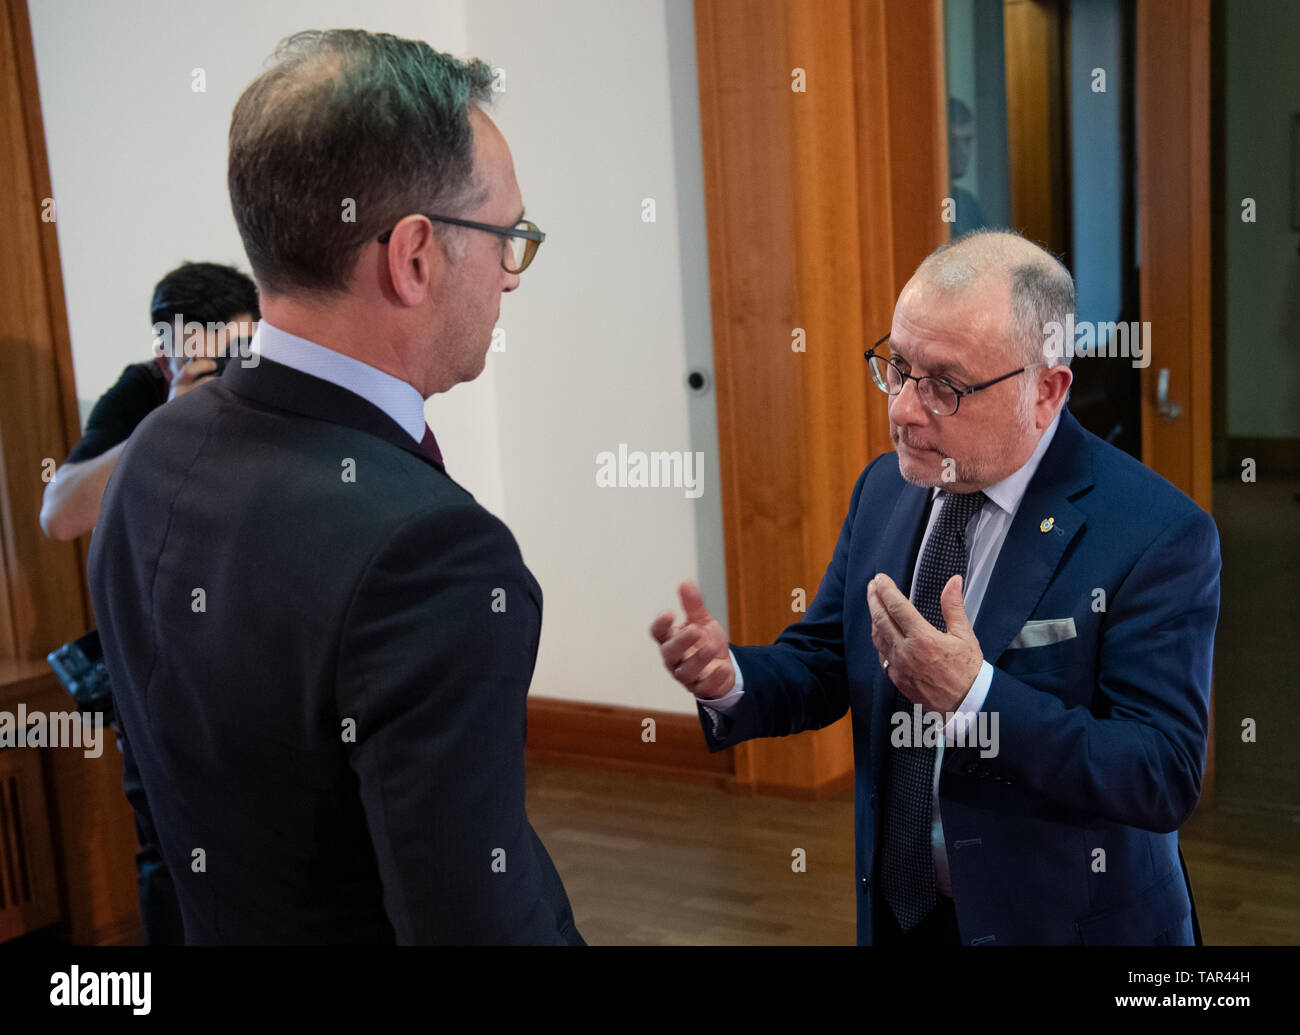 Berlin, Germany. 27th May, 2019. Jorge Marcelo Faurie (r), Foreign Minister of Argentina, speaks with Heiko Maas (SPD, l), Federal Foreign Minister, after a press conference at the Federal Foreign Office. A Latin America and Caribbean Conference will be held at the Federal Foreign Office from 28 May 2019. More than 20 foreign ministers from the region are expected. Credit: Ralf Hirschberger/dpa/Alamy Live News Stock Photo